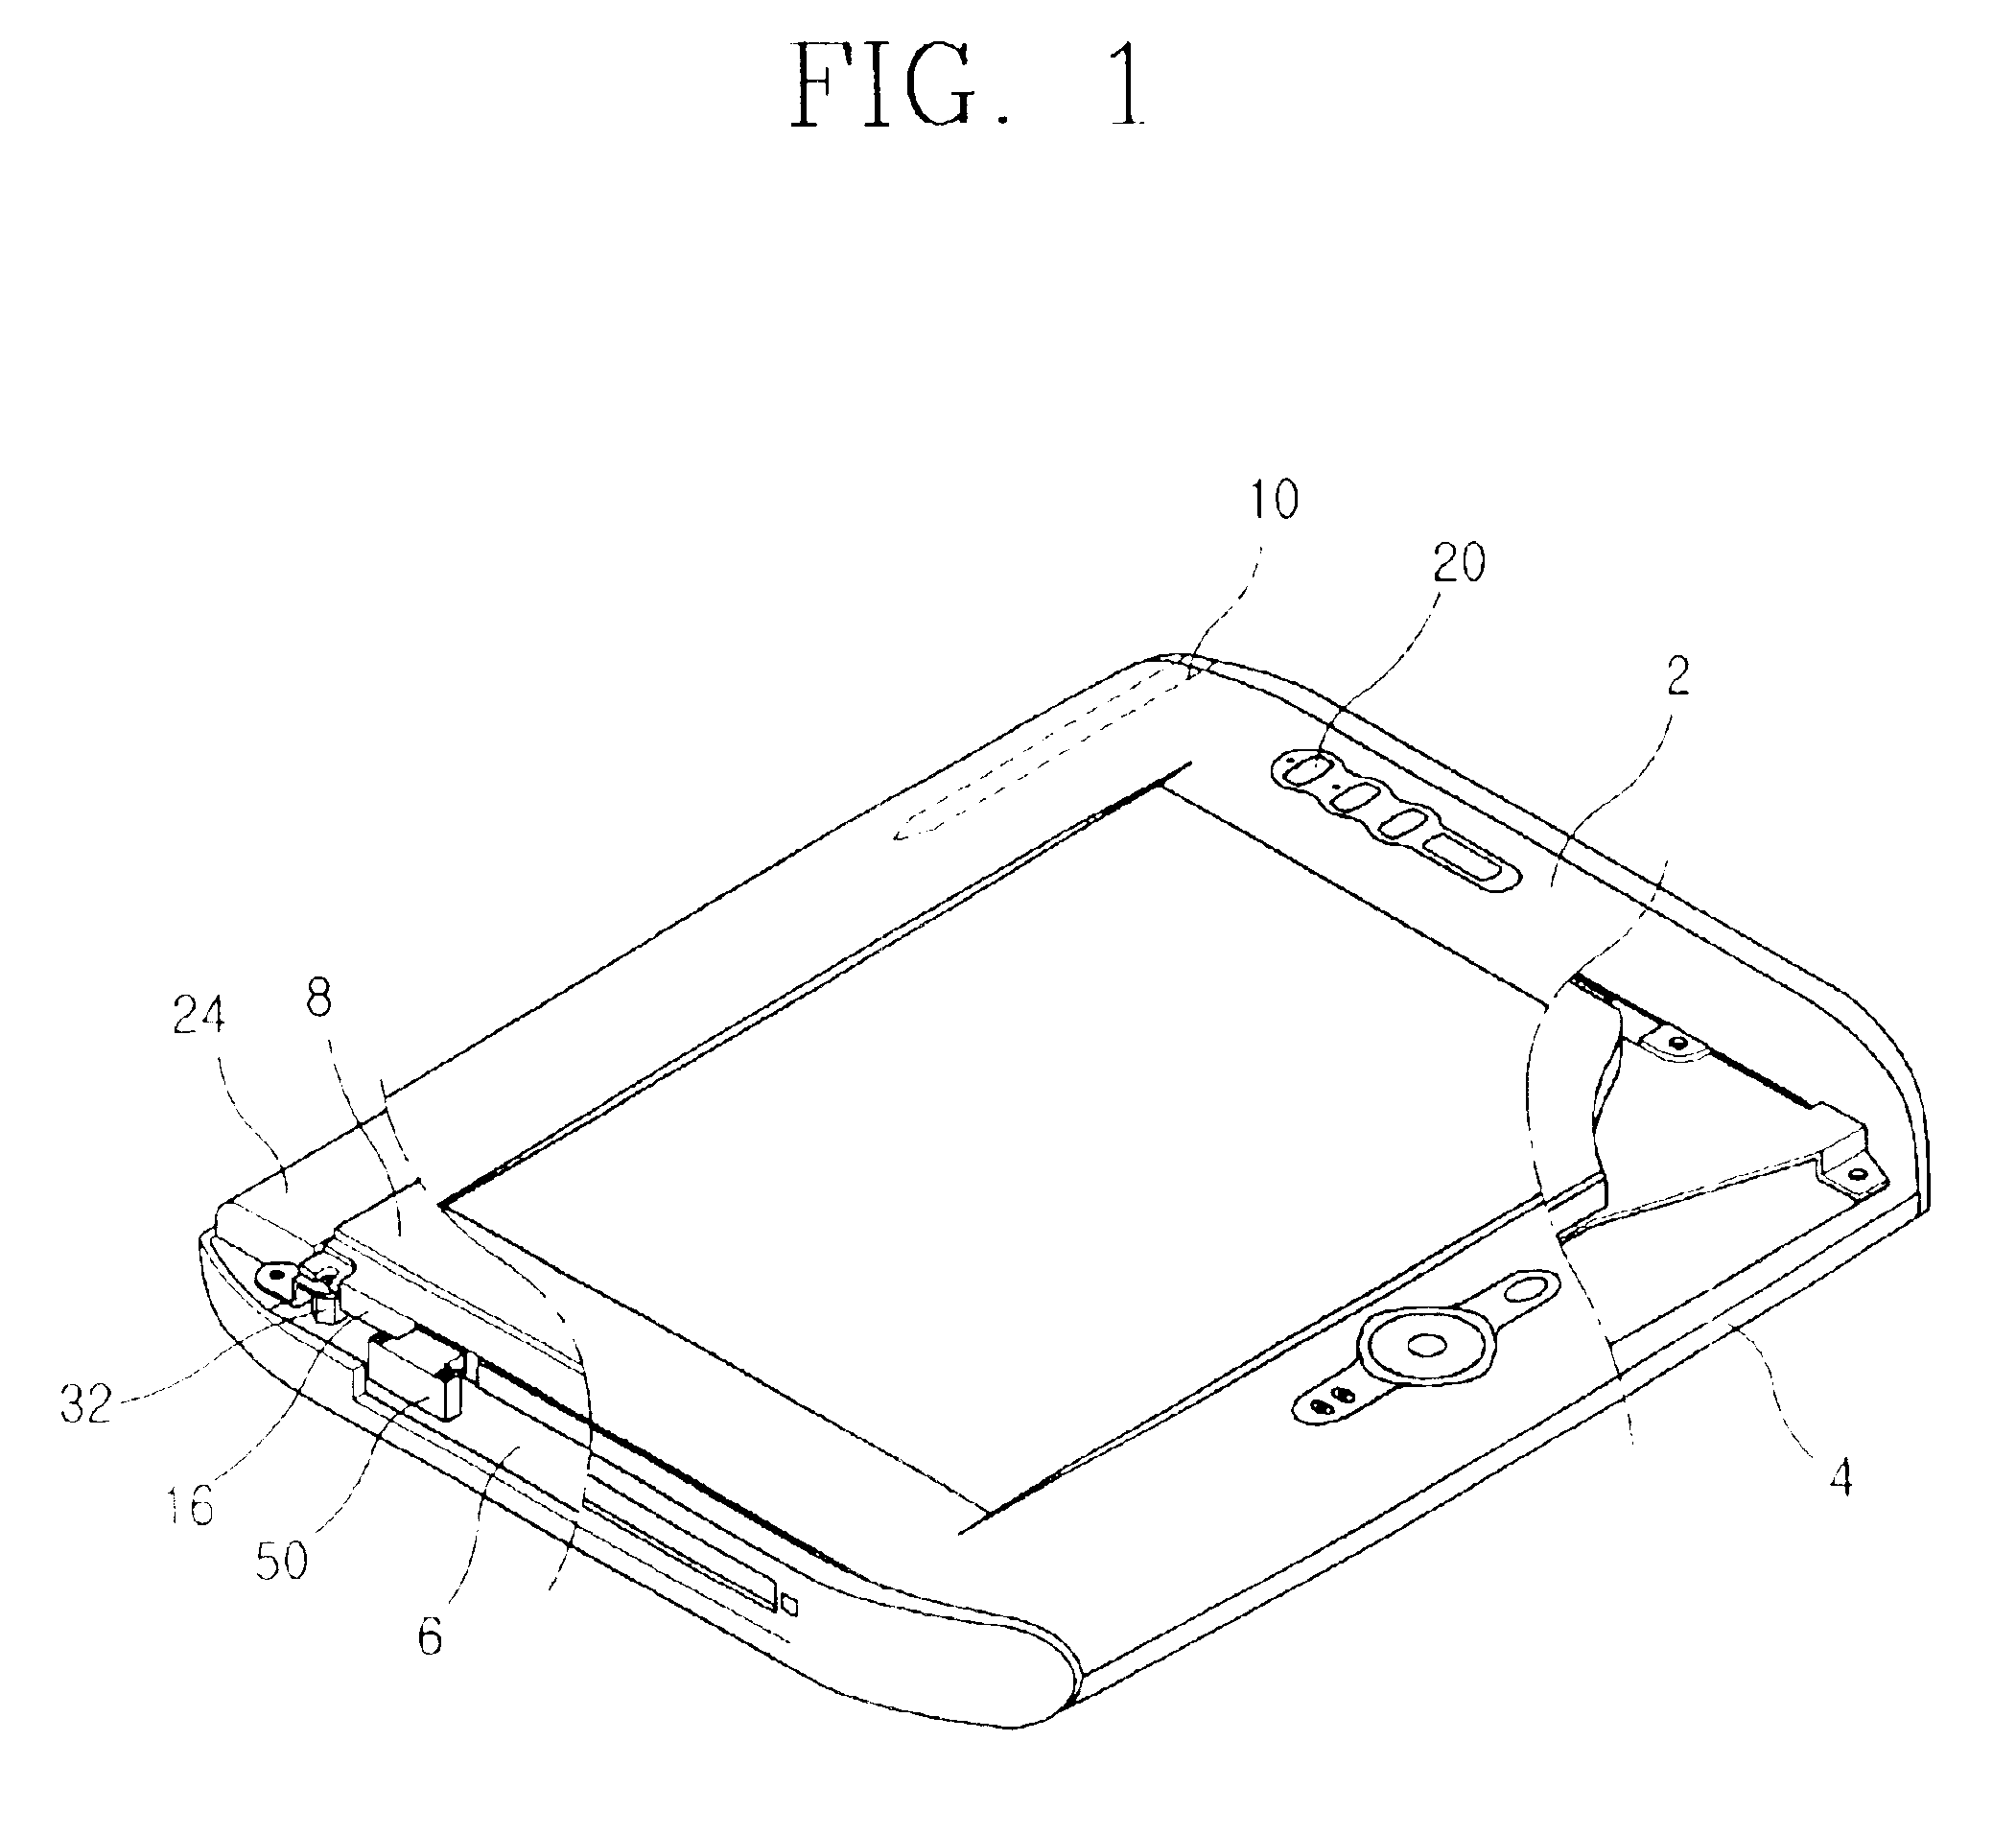 Portable electronic device having LCD and touch screen